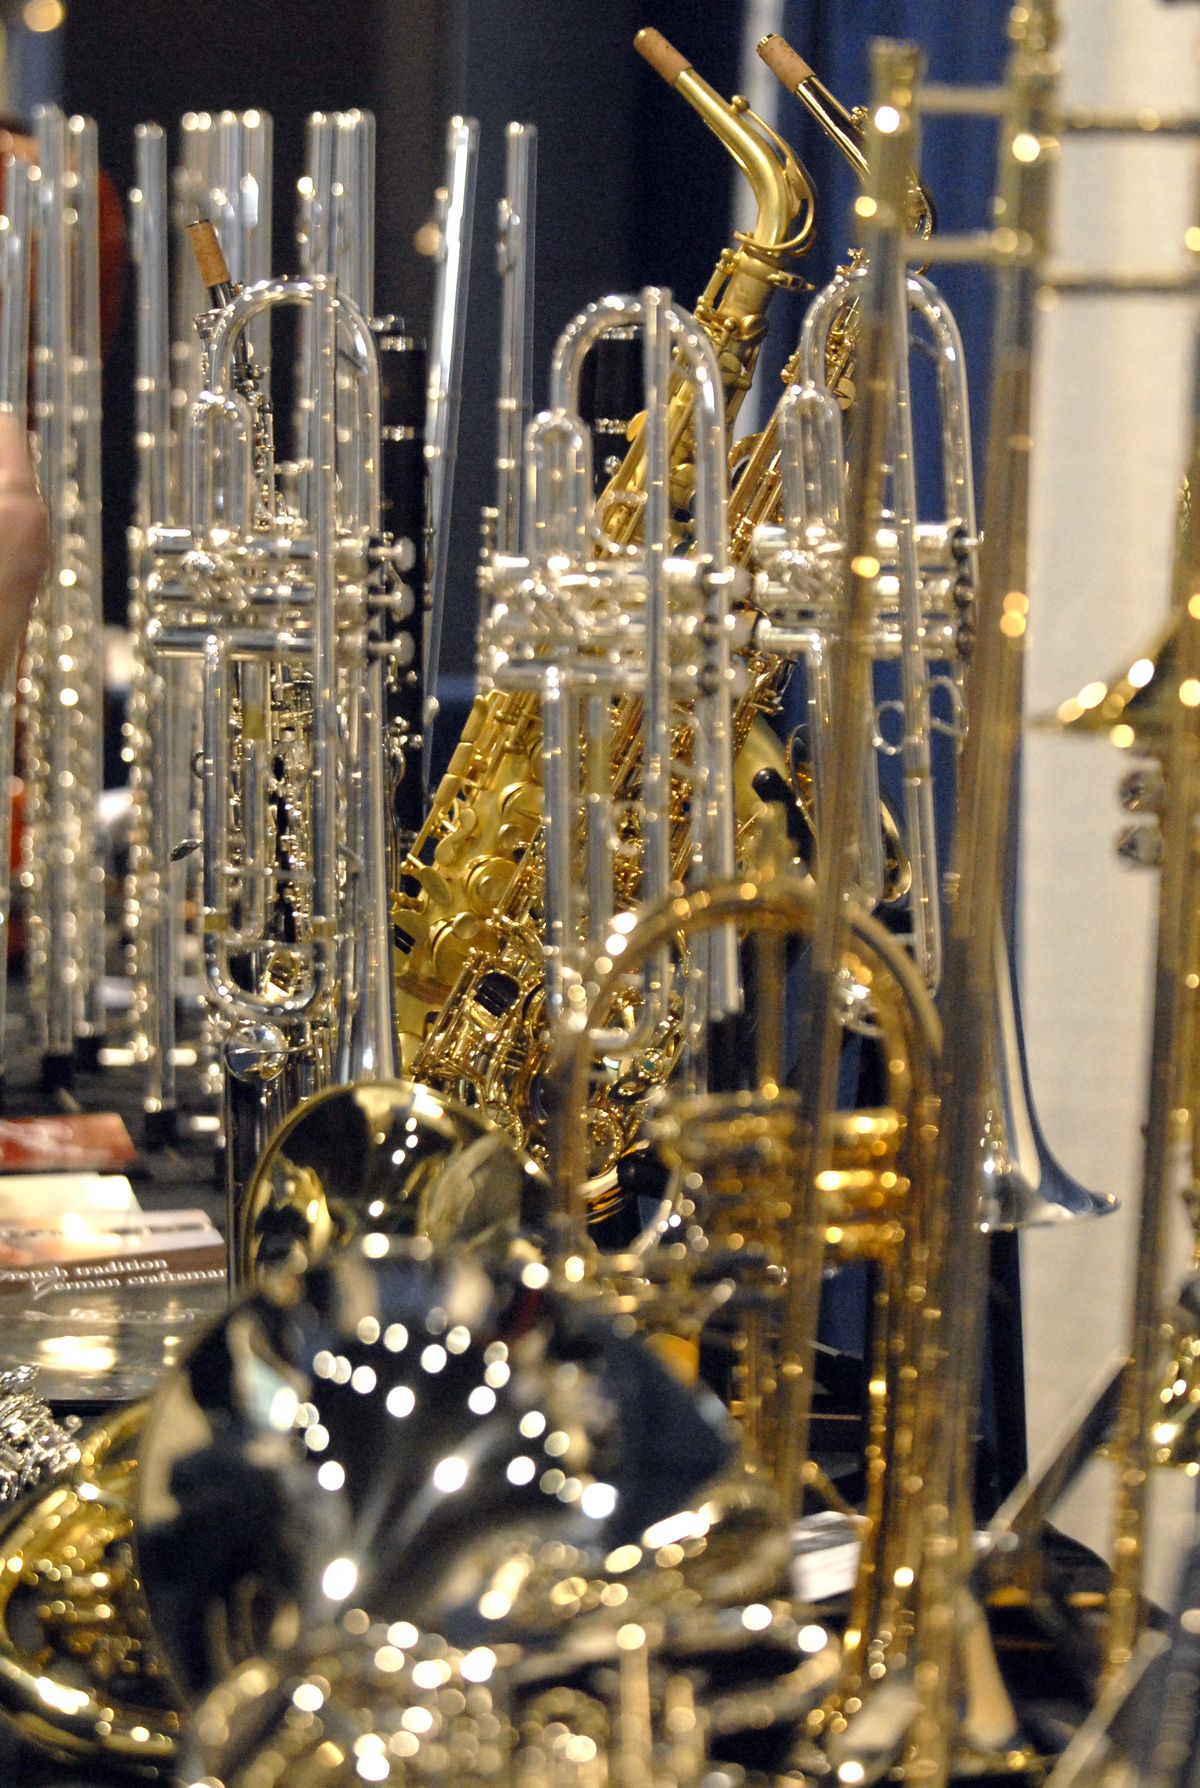 Brass and woodwind instruments were on display in the exhibit area  at the Convention Center. About 1,600 students attended the conference. (Jesse Tinsley / The Spokesman-Review)